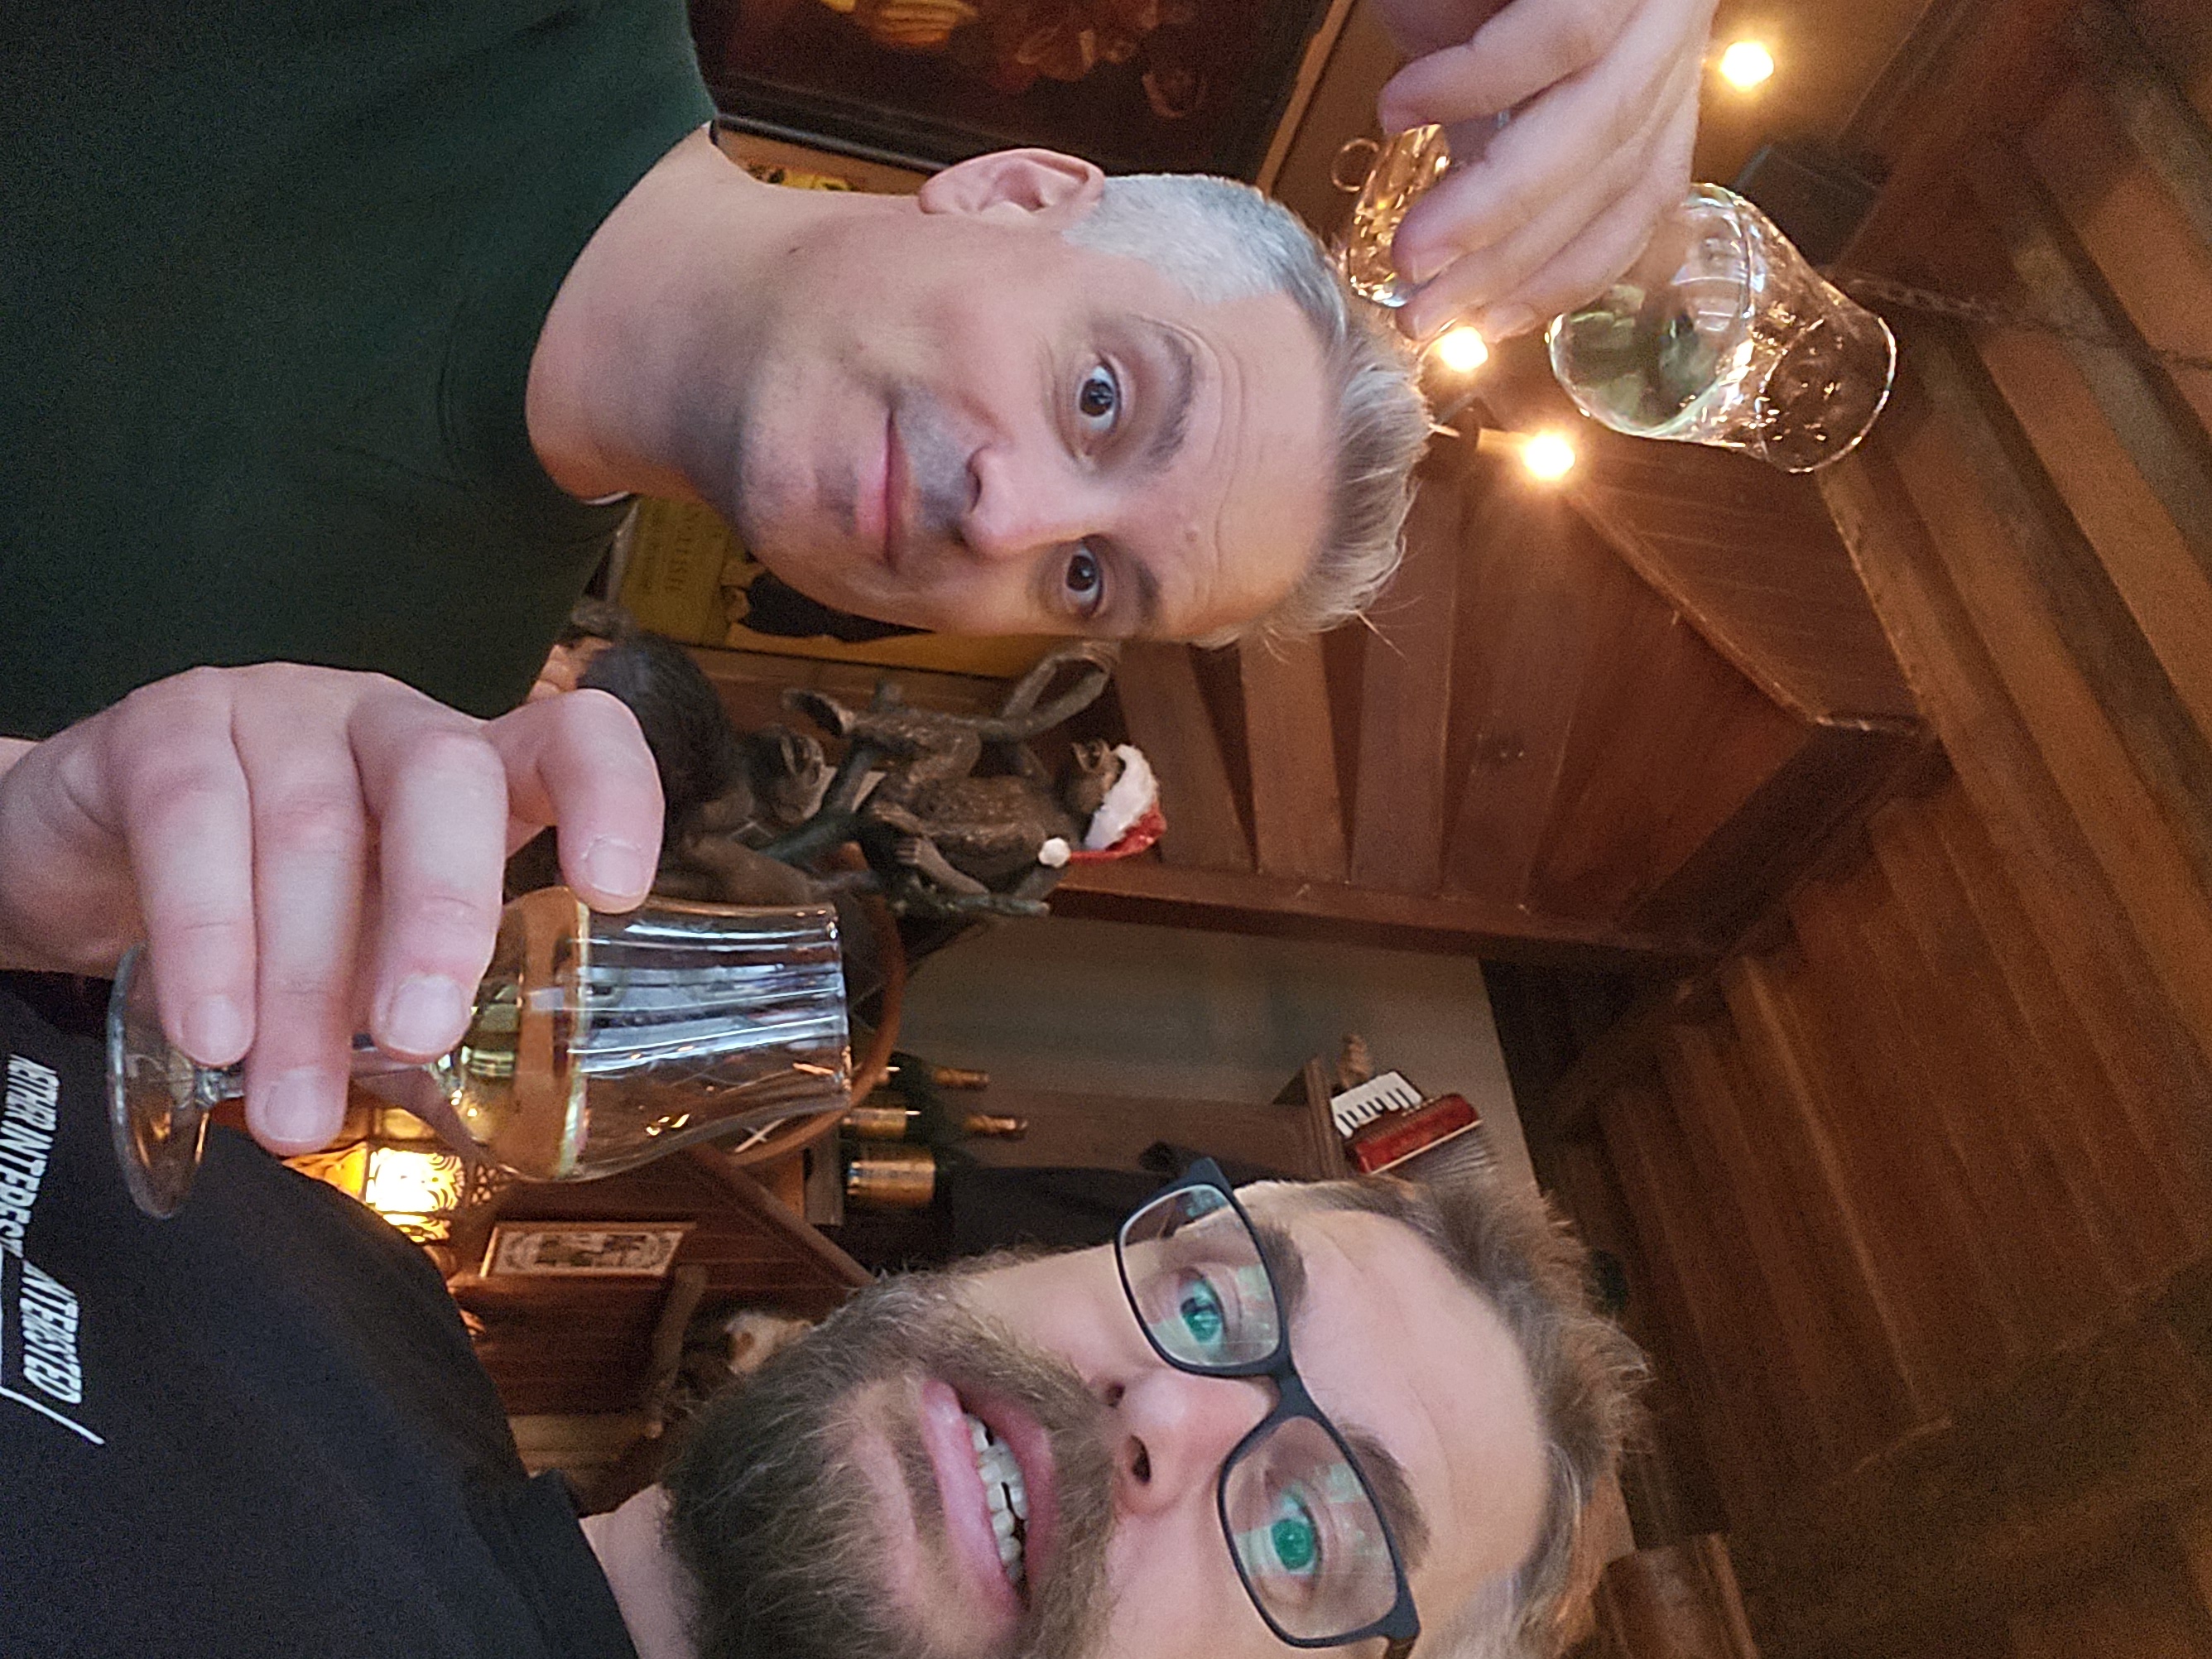 Mark and I enjoying a glass of Jenever, behind us is a statue of a monkey with a Christmas hat on, in June